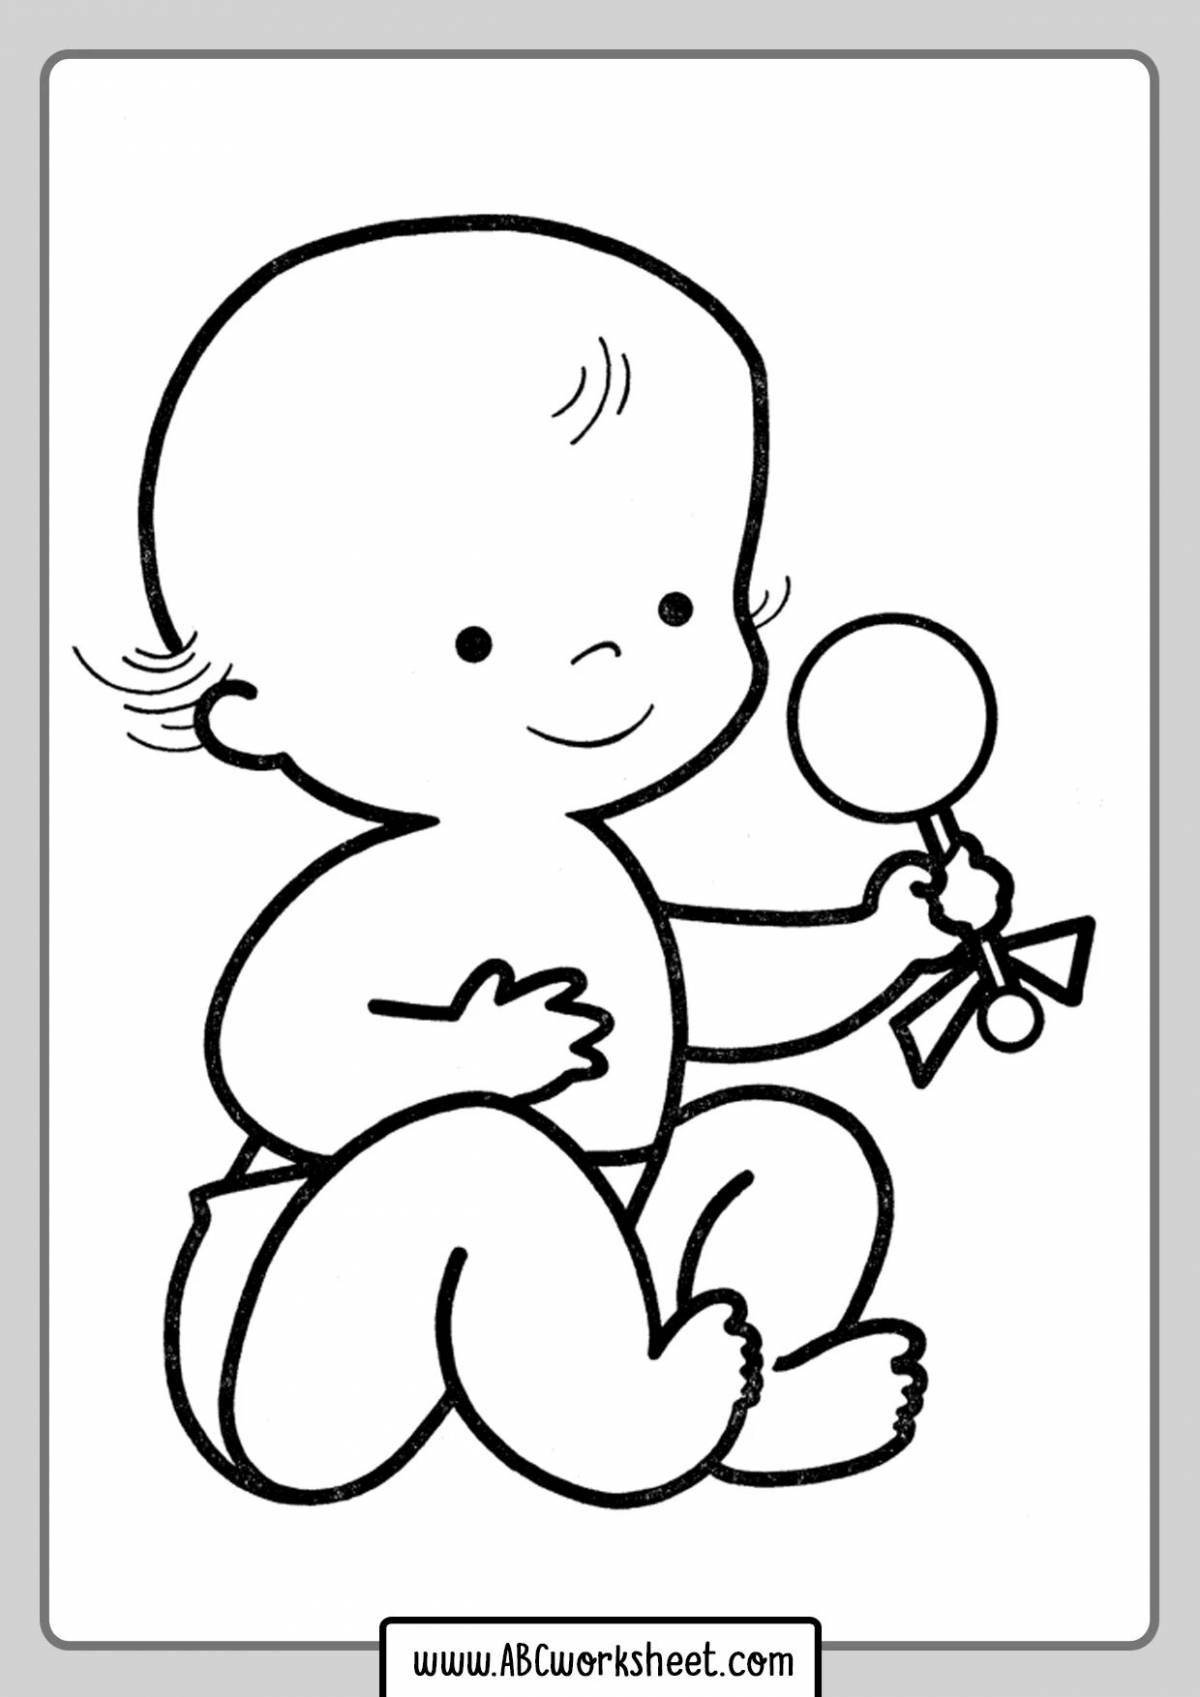 Color-fiesta coloring book for baby